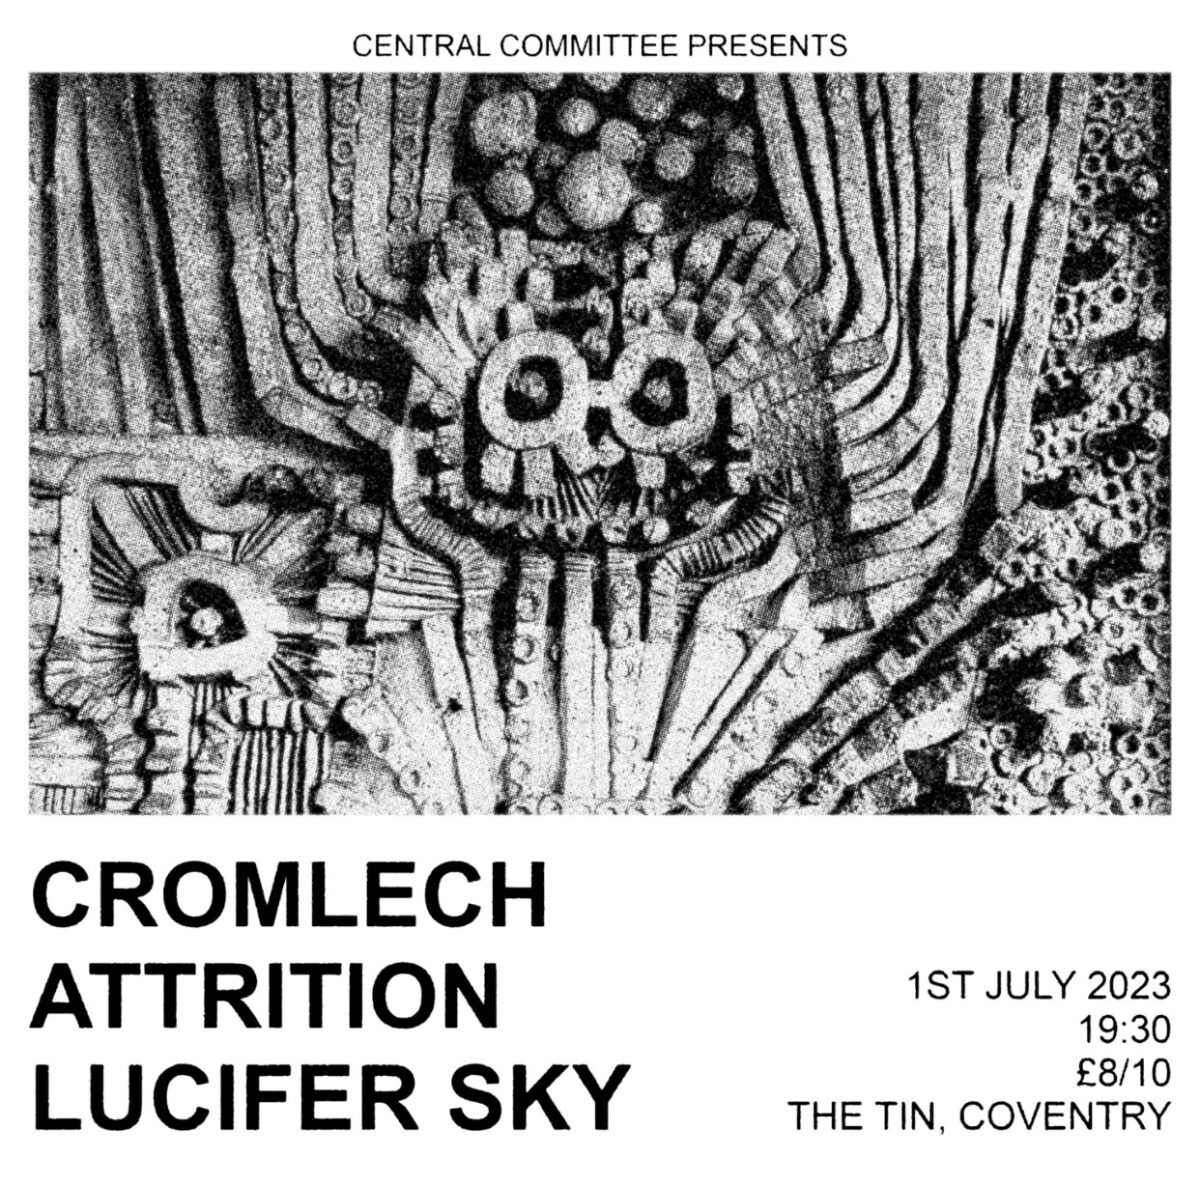 A black and white poster for a concert presented by Central Committee at The Tin Music and Arts on Saturday 1st July 2023, featuring Cromlech, Attrition and Lucifer Sky.